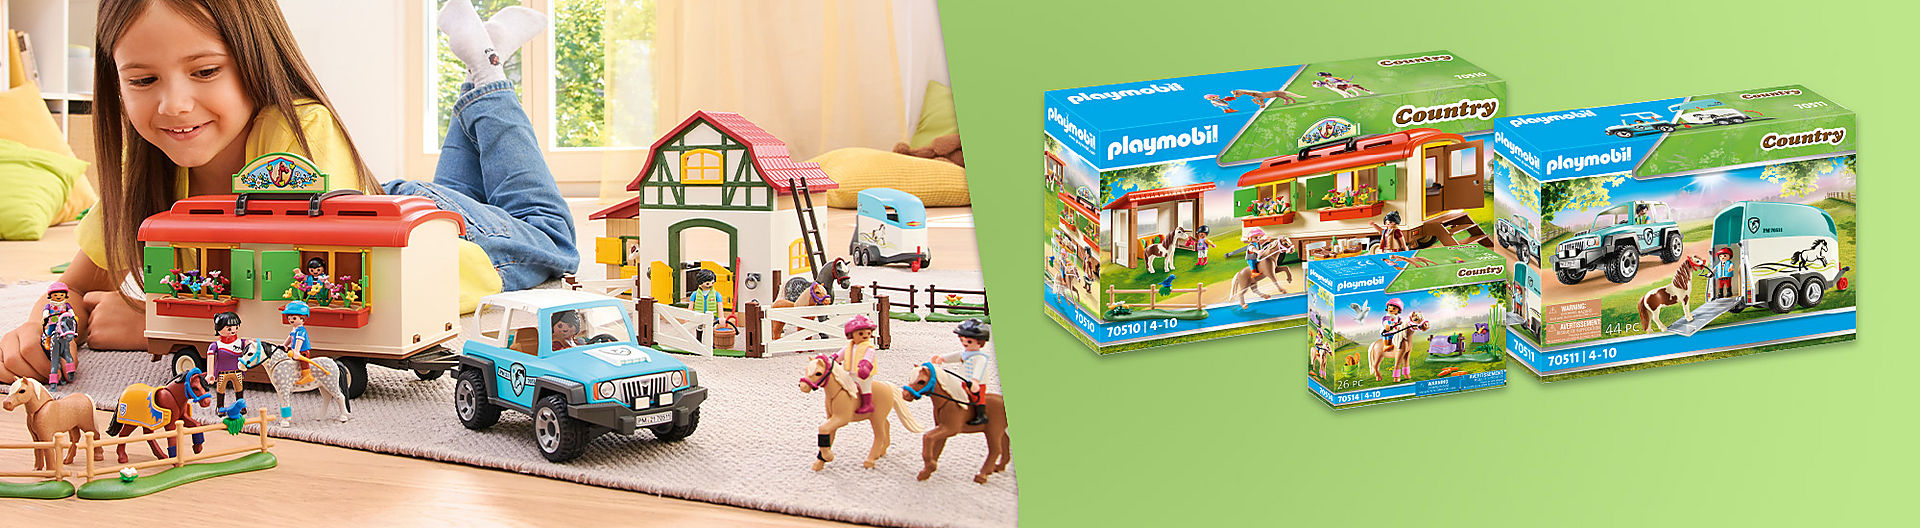 My big pony farm - discover the new playsets like 70510 Pony Shelter with Mobile Home